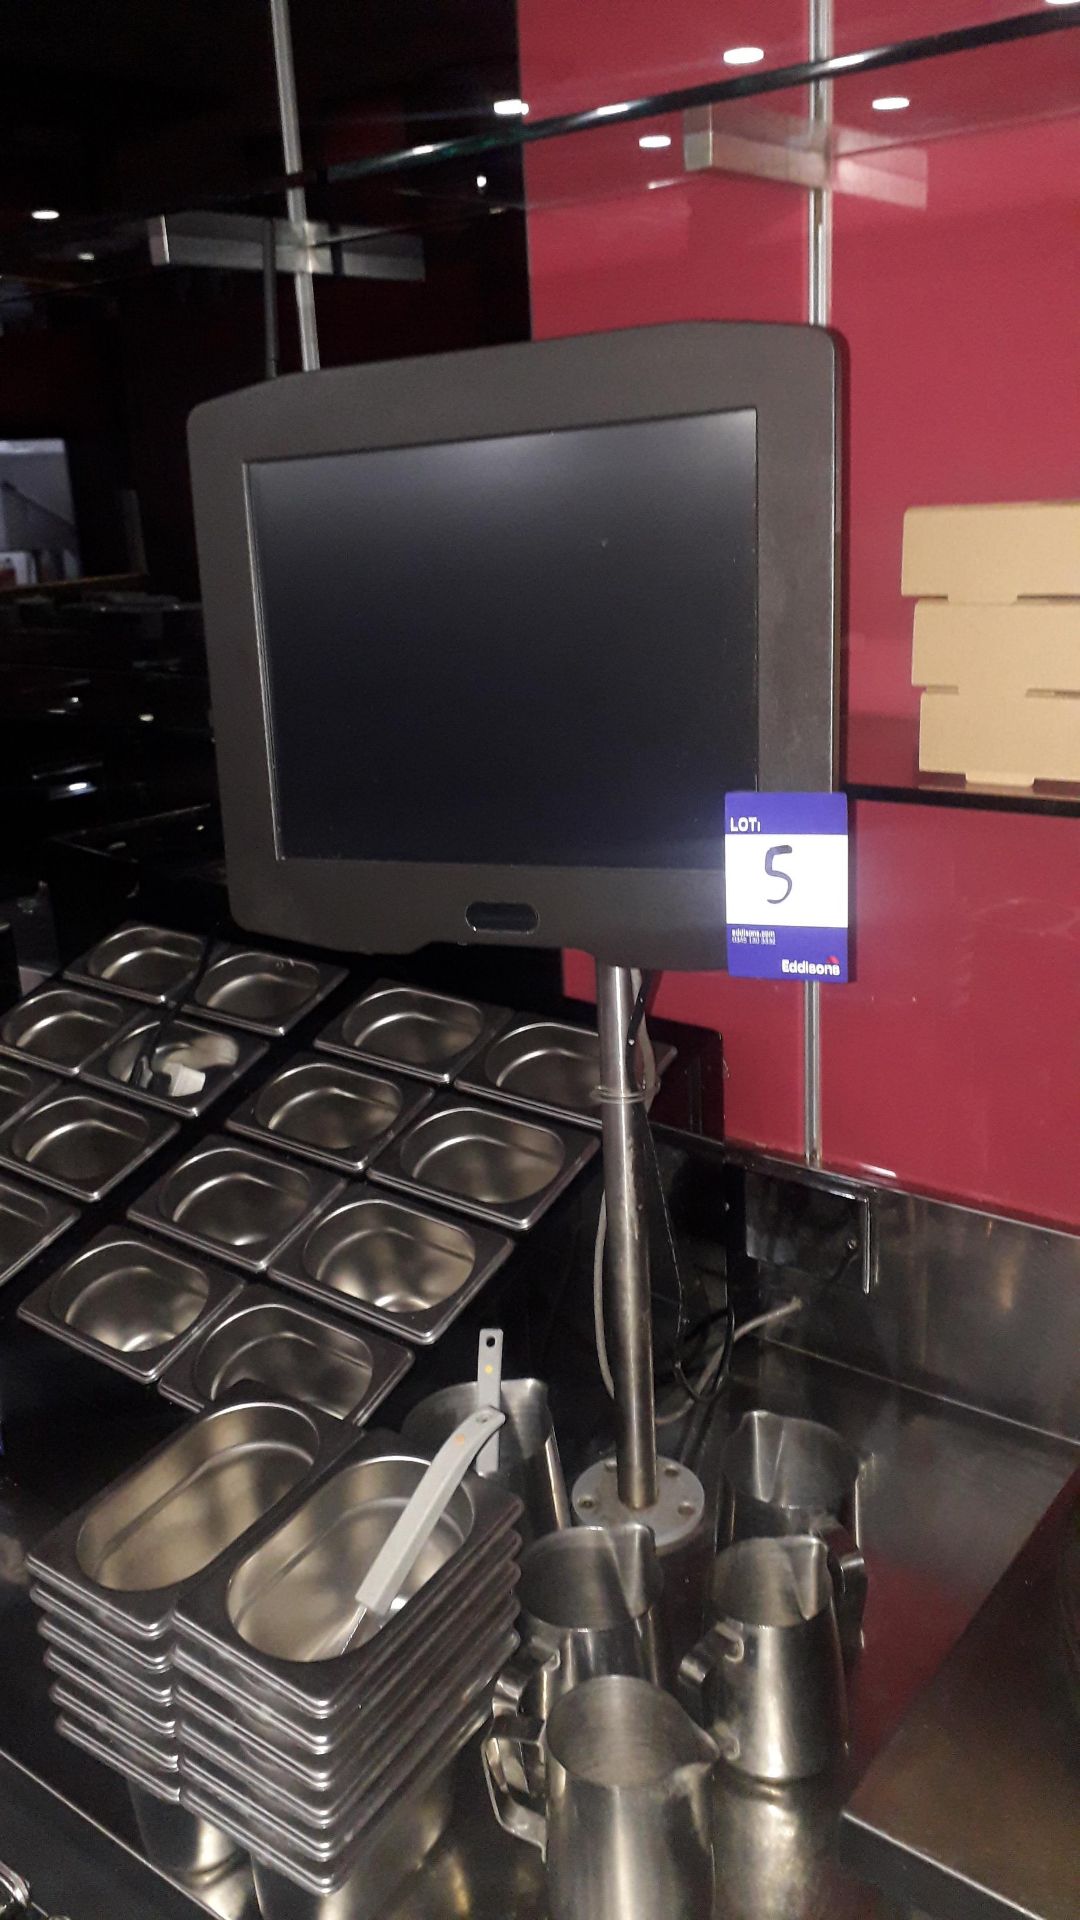 Aures Epos System with Aures double sided touch screen terminal, Aures ODP333 receipt printer, - Image 7 of 8